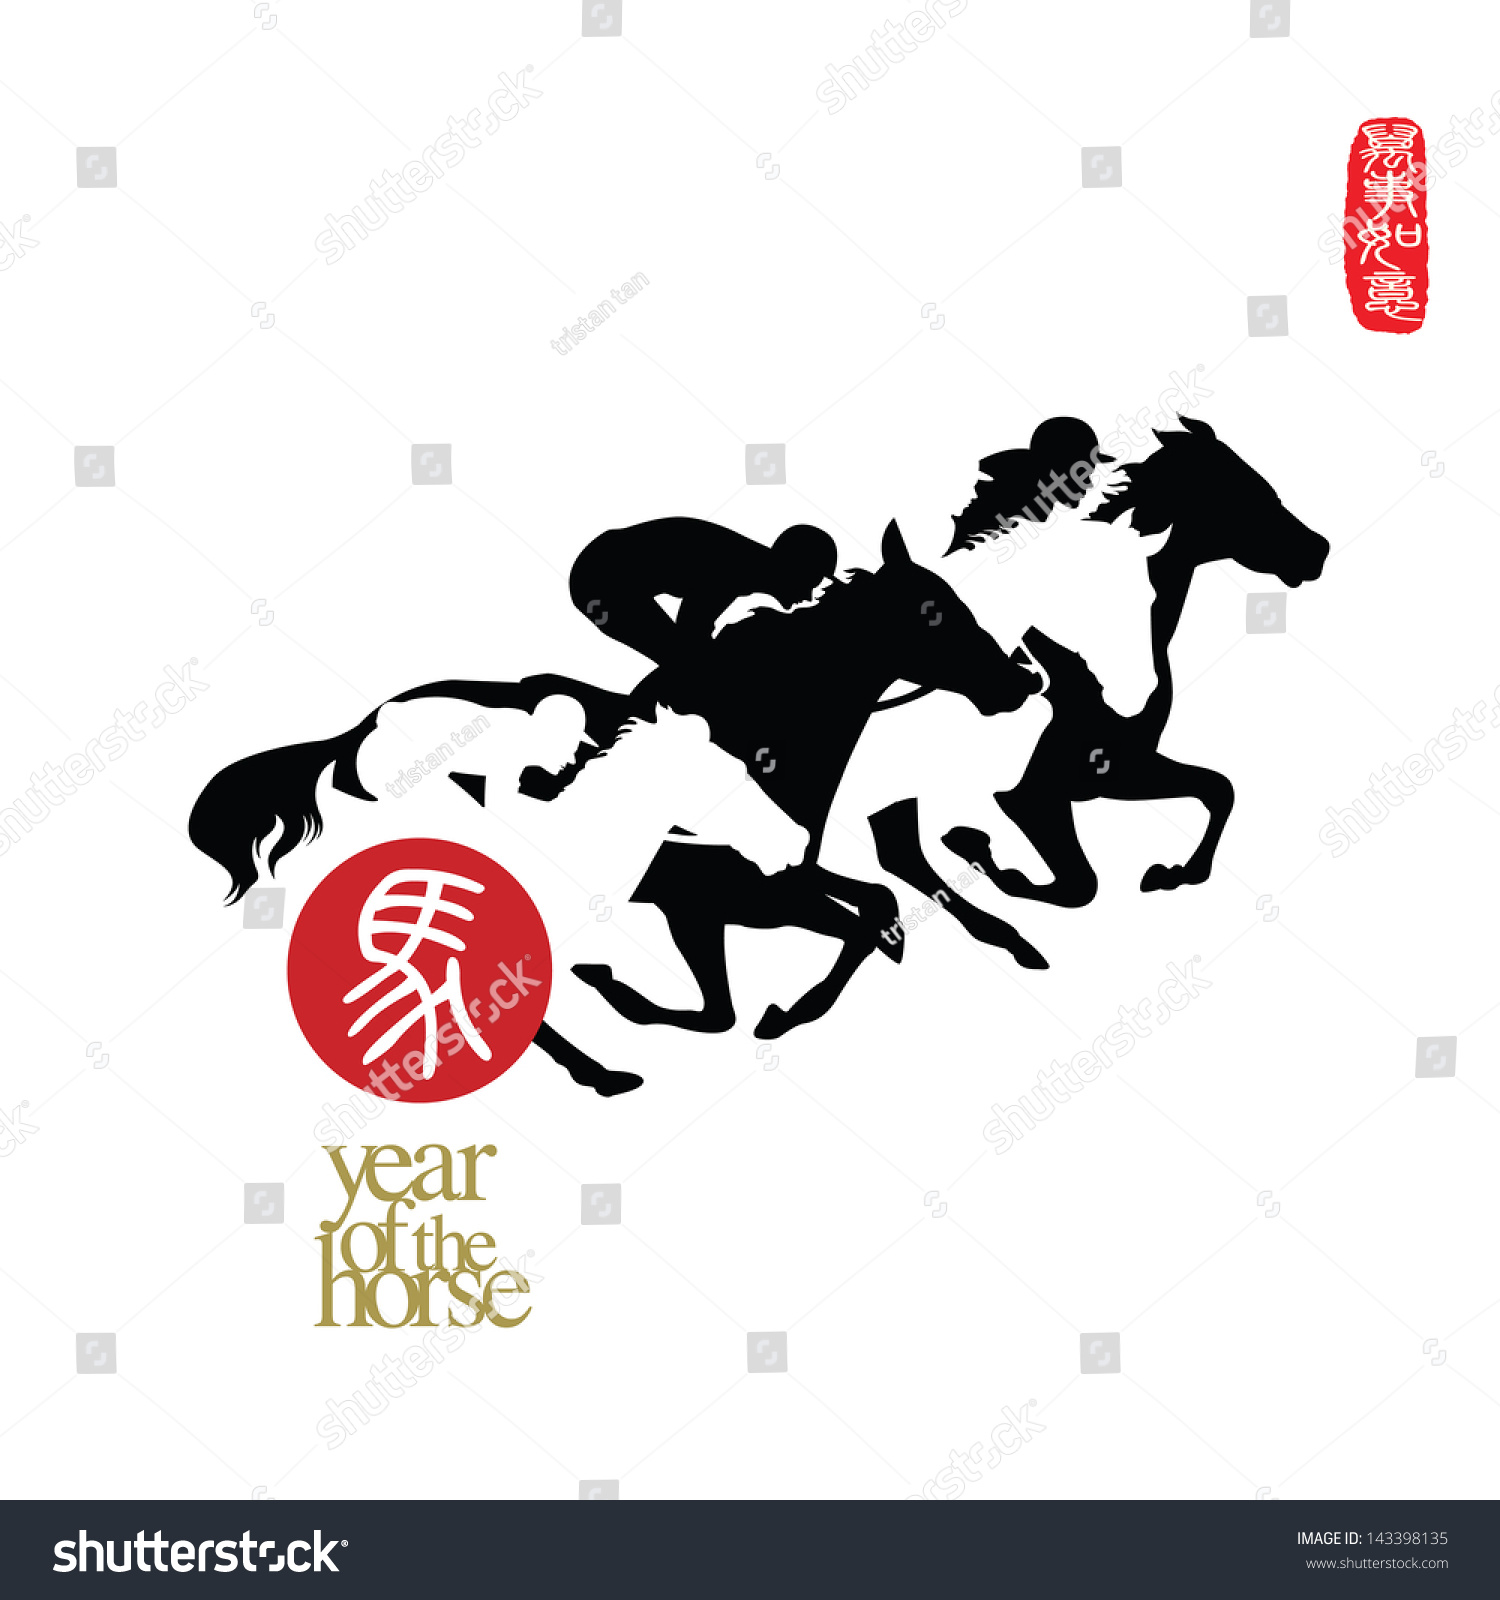 Vector Illustration Of Horse Racing. Chinese Calligraphy Ma ...